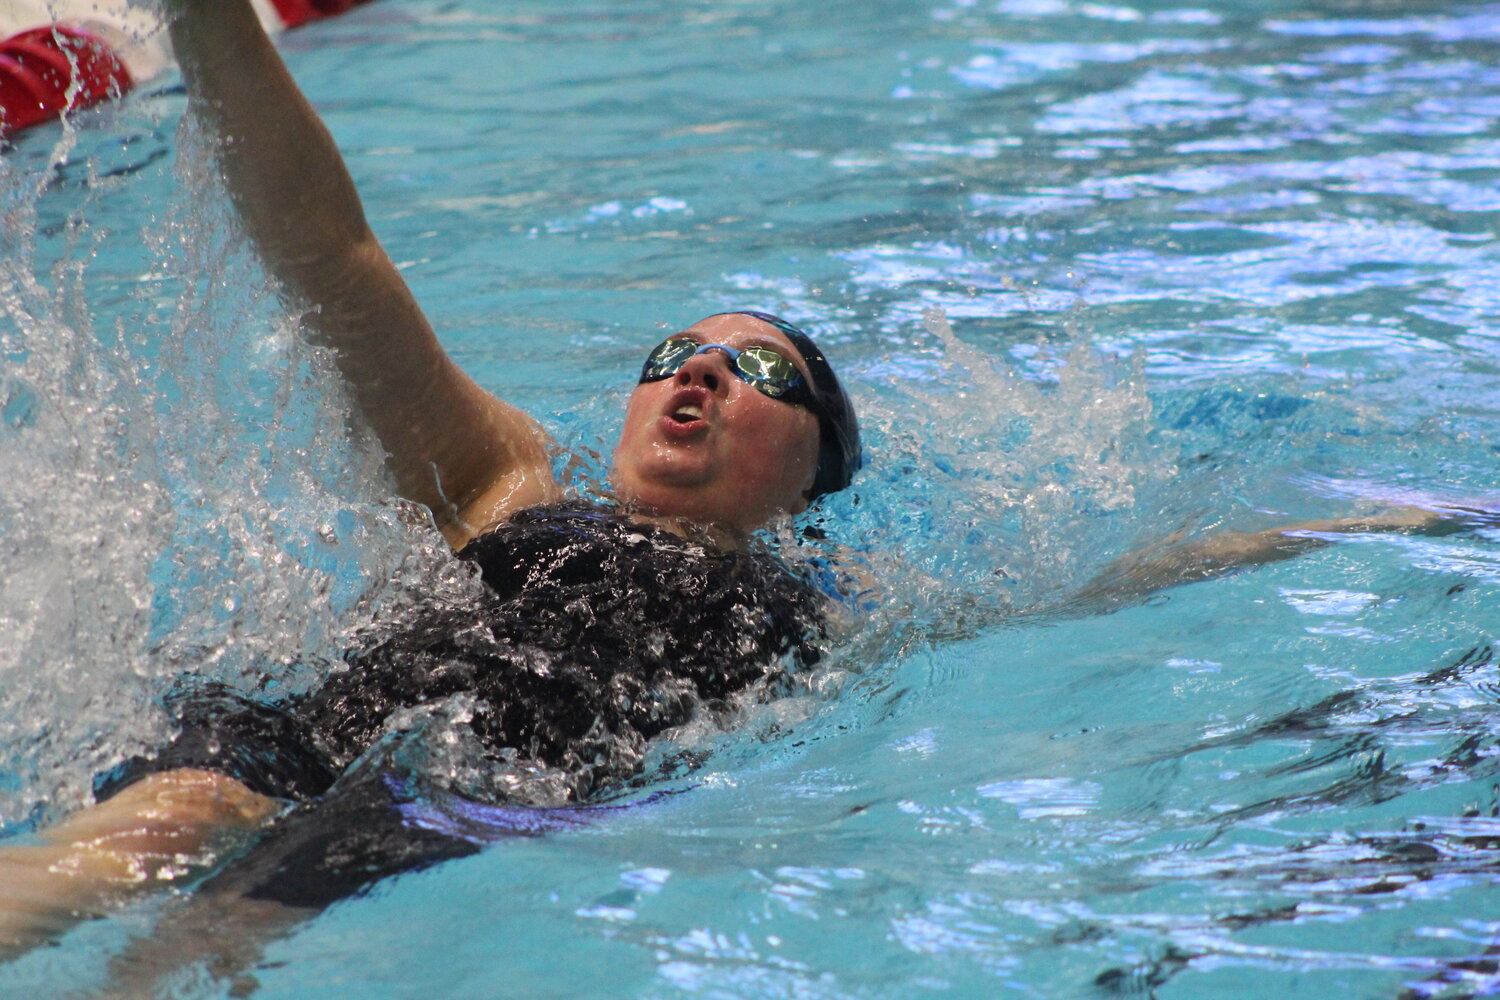 Dusty Robinson also made her state finals debut for the Chargers on Friday in the 100 backstroke.